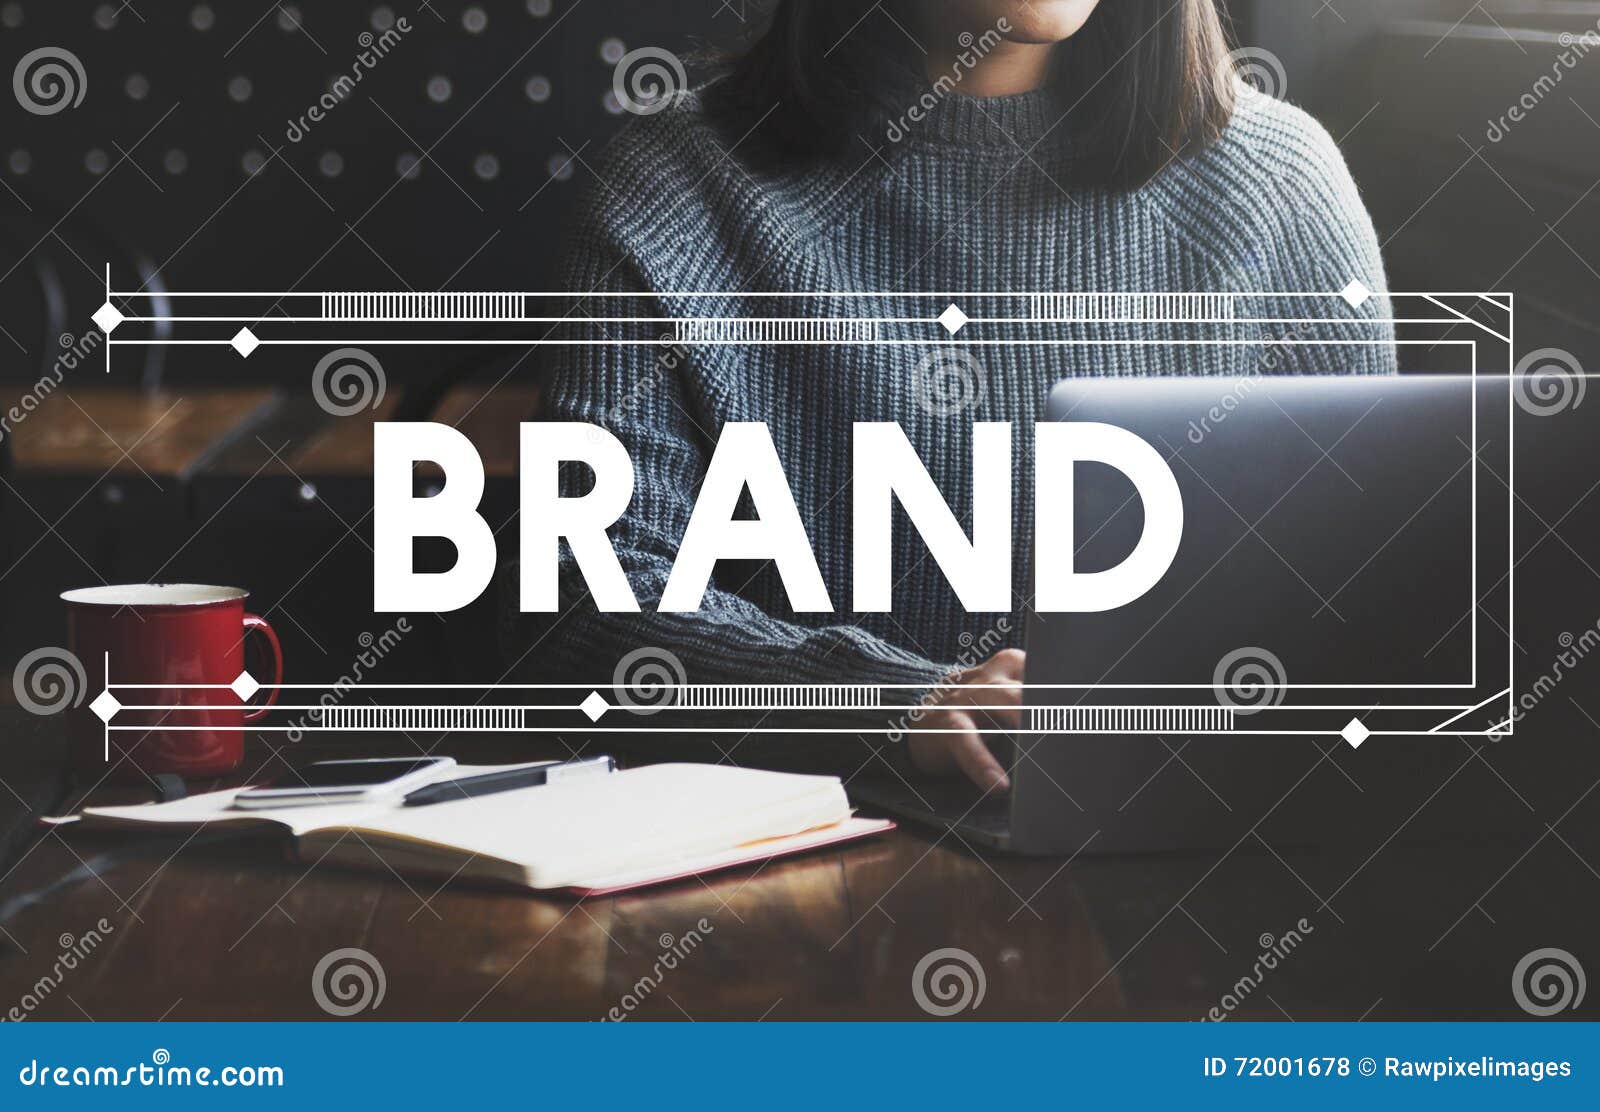 brand branding marketing commercial advertising product concept